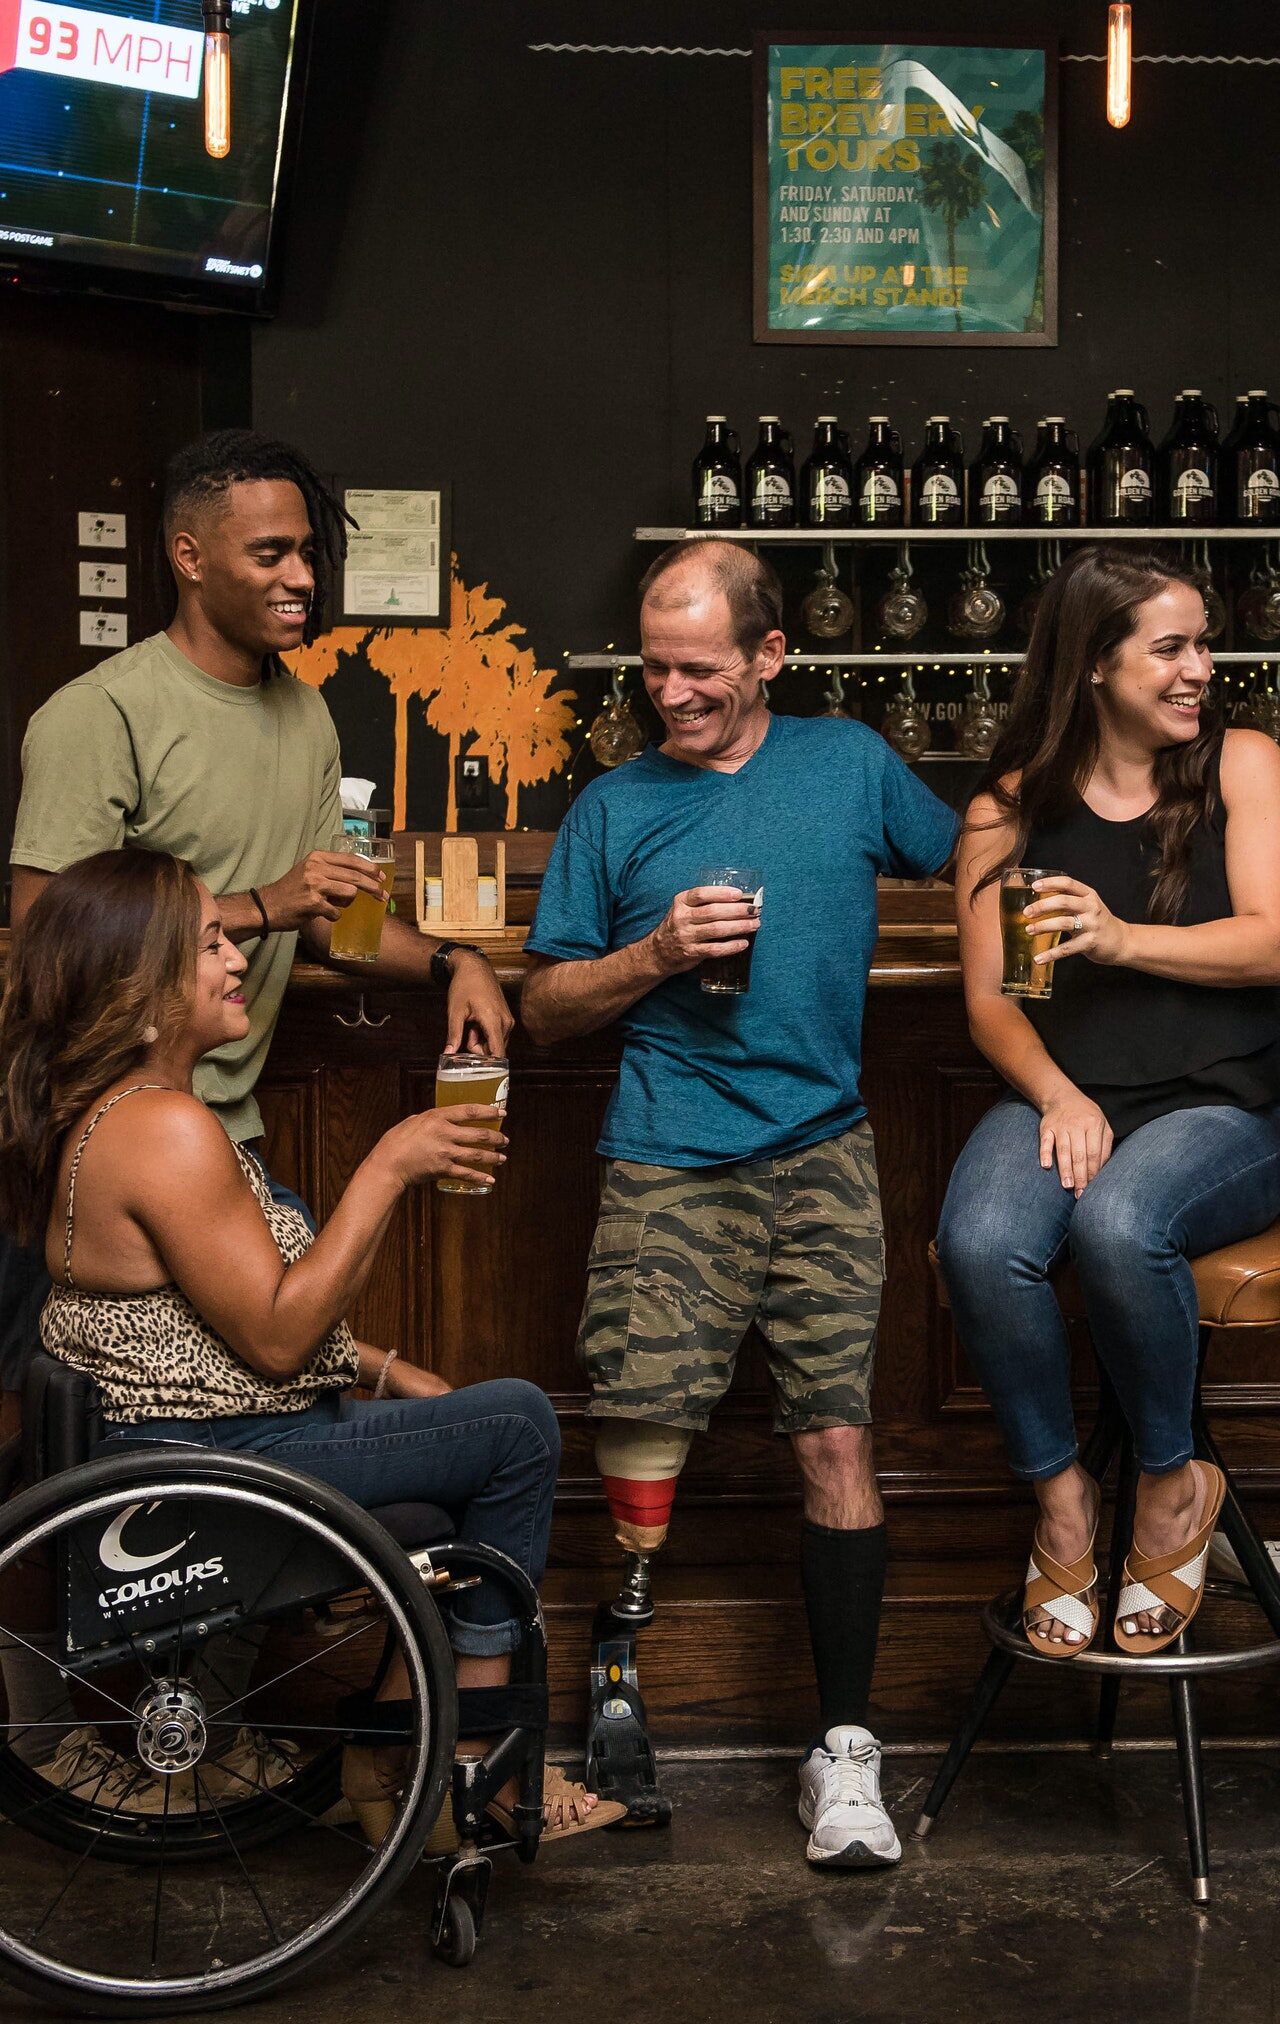 Photo: four adults, one using a wheelchair at a bar